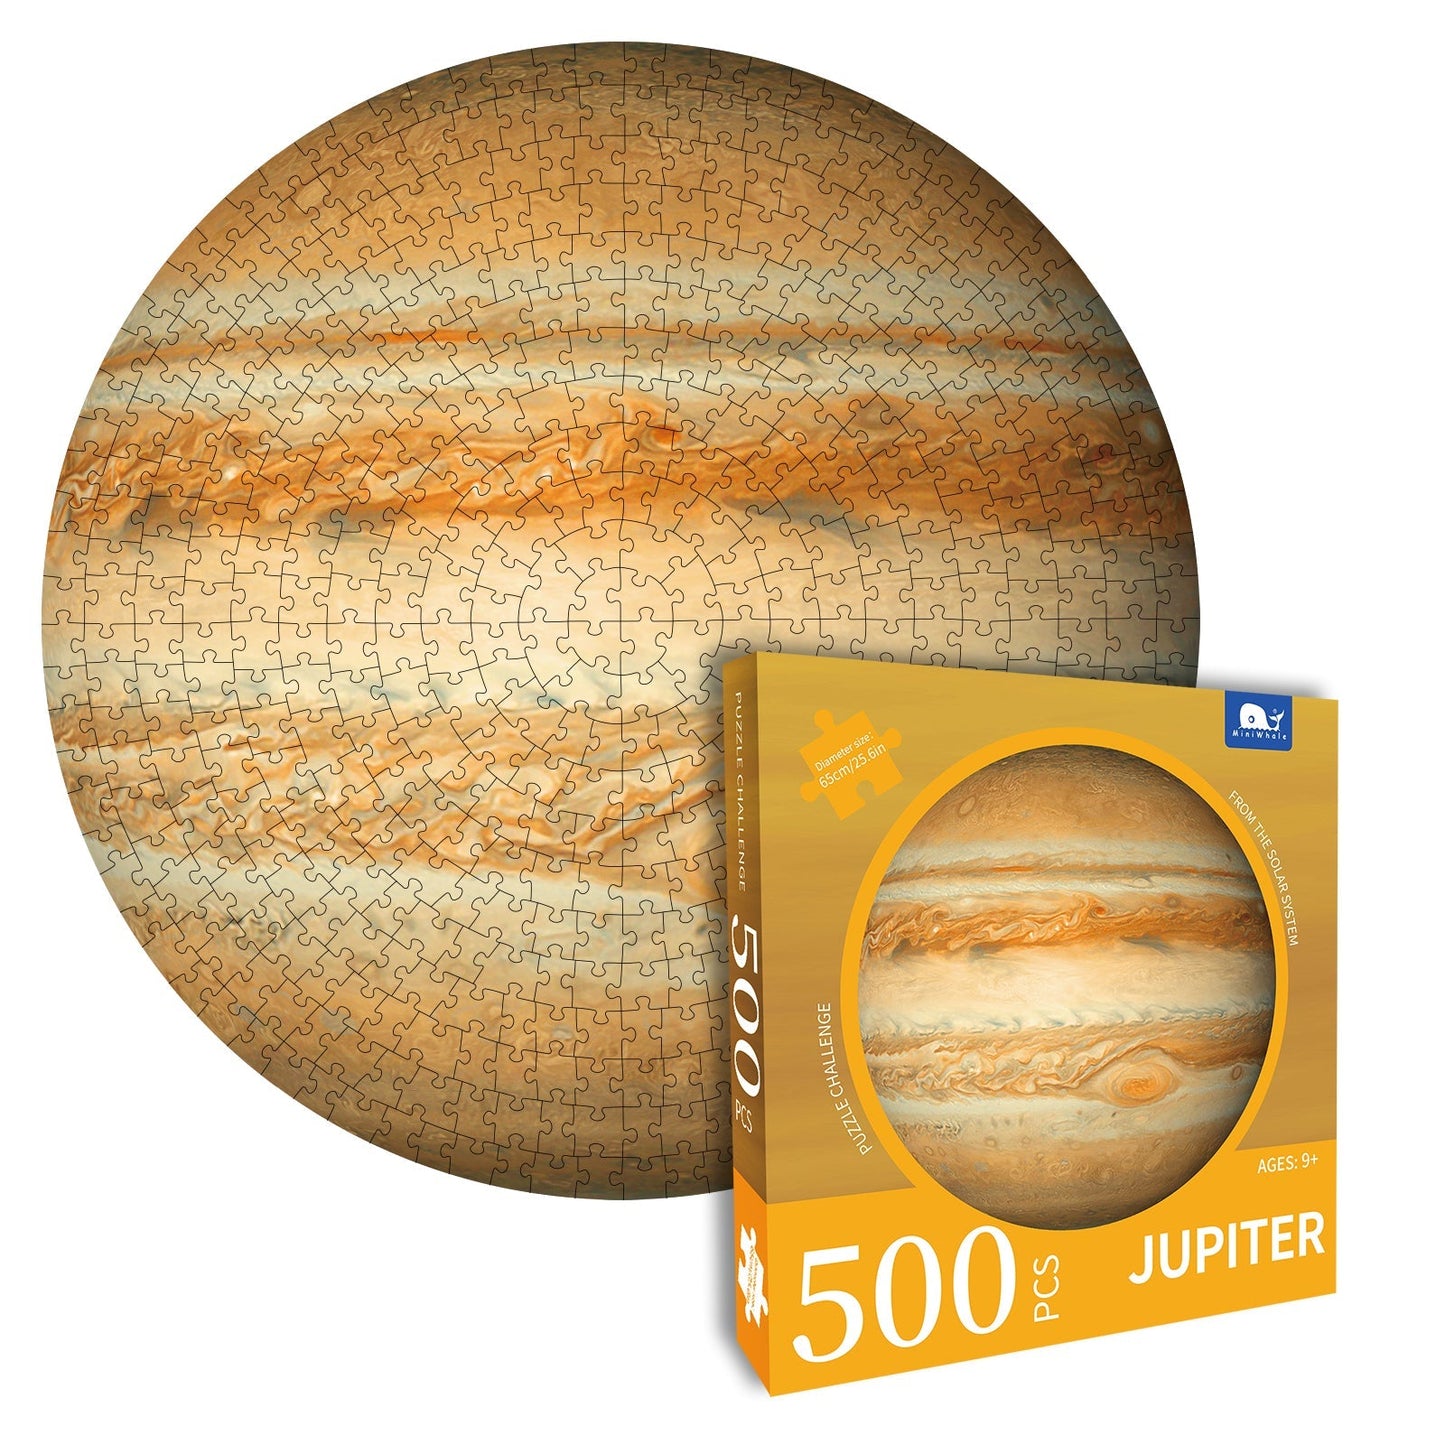 Miniwhale Jupiter adult 500 puzzle game star Themed Round puzzle jigsaw for adults brain